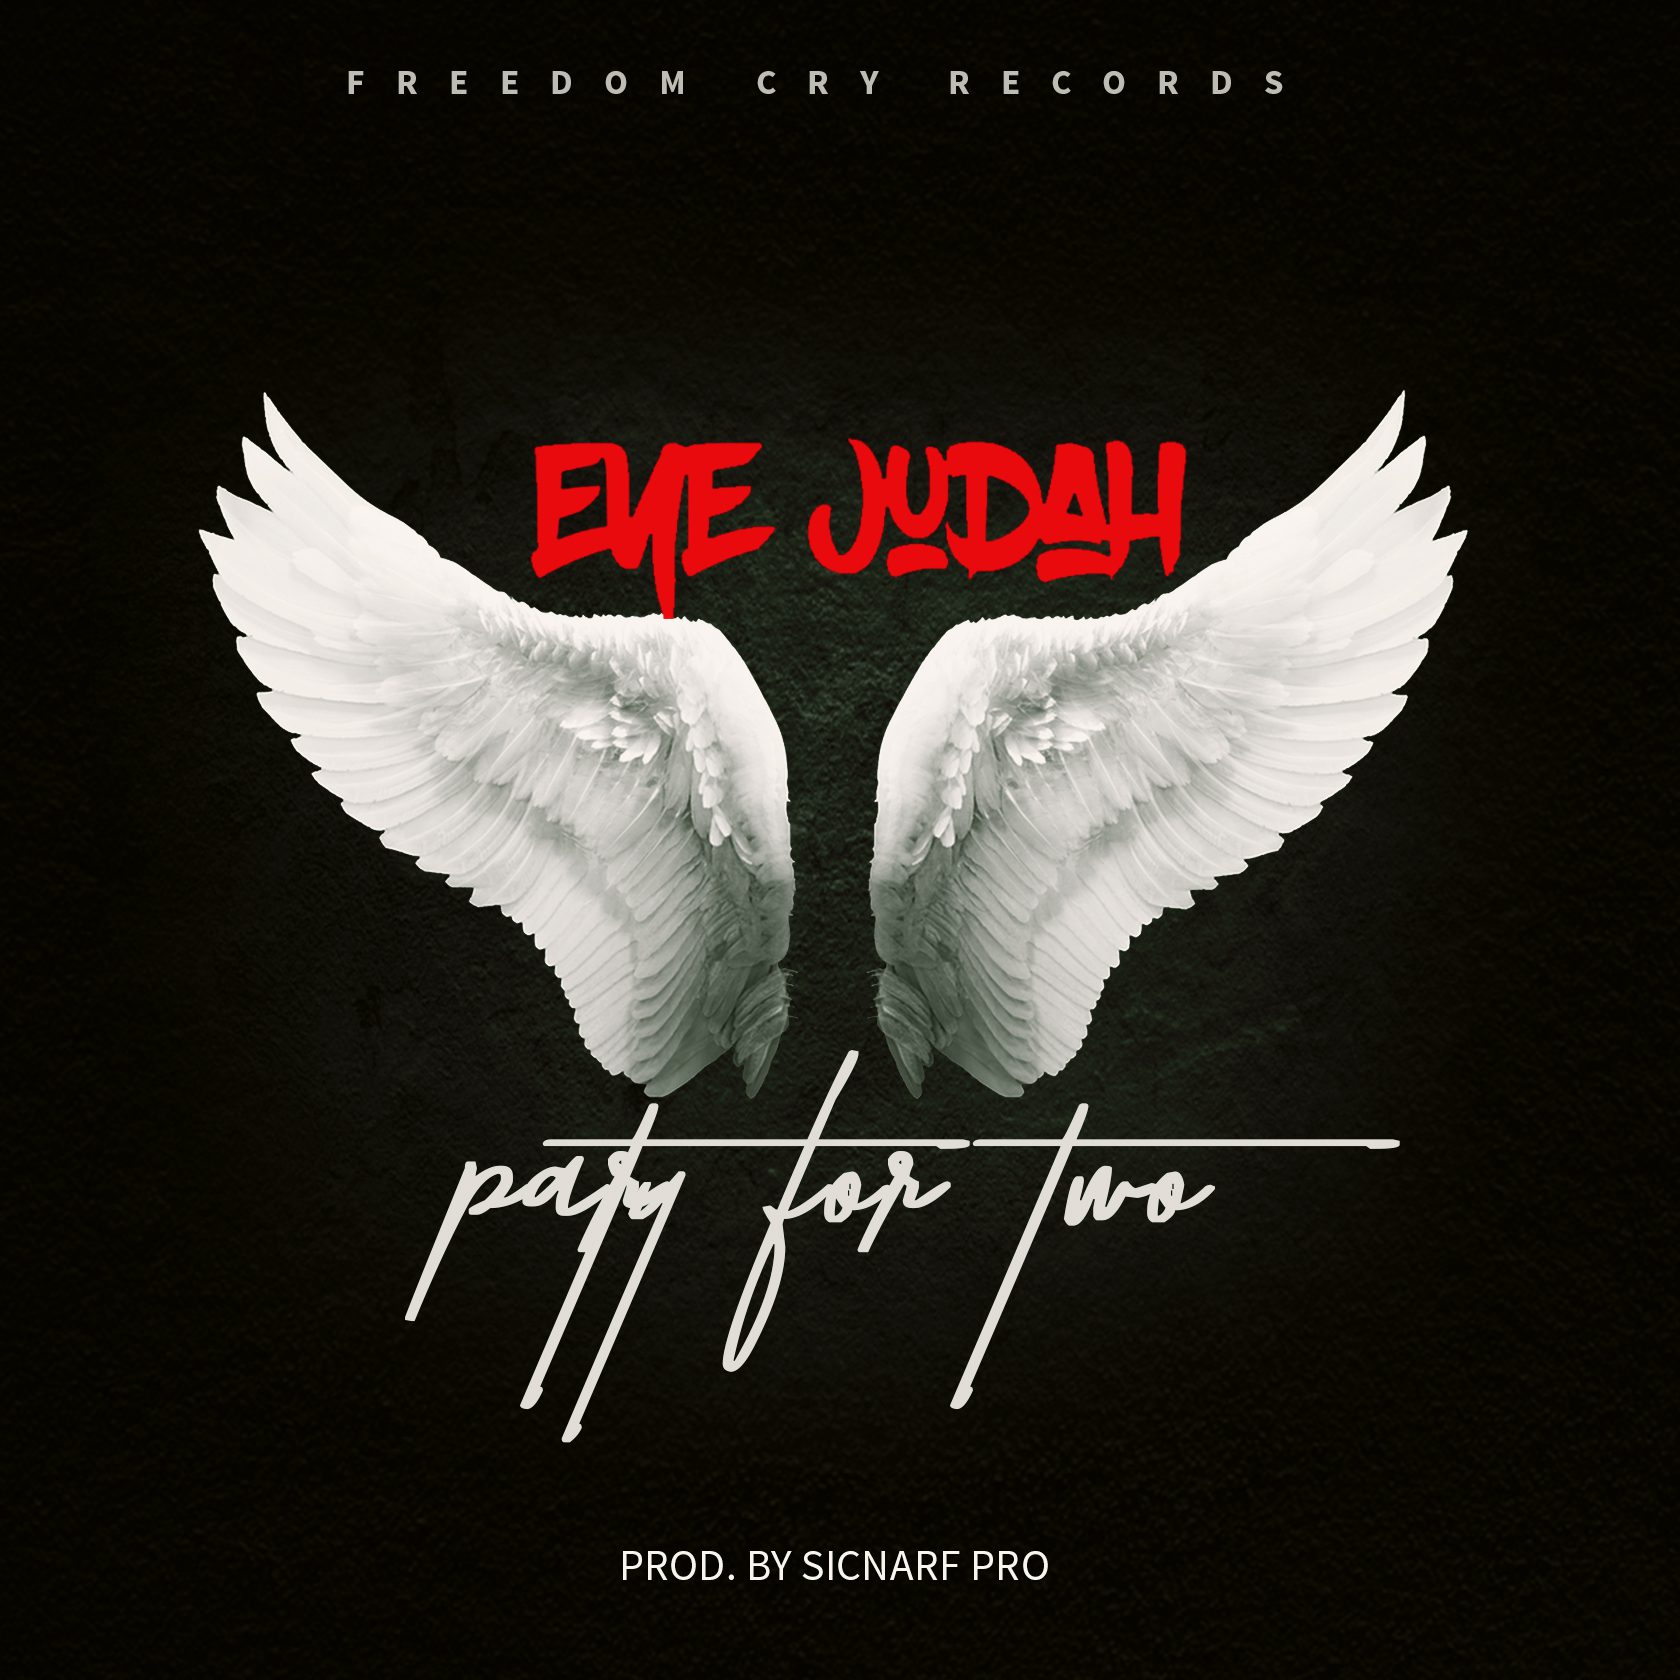 Eye Judah – Party For Two (Prod. By Sicnarf Pro)